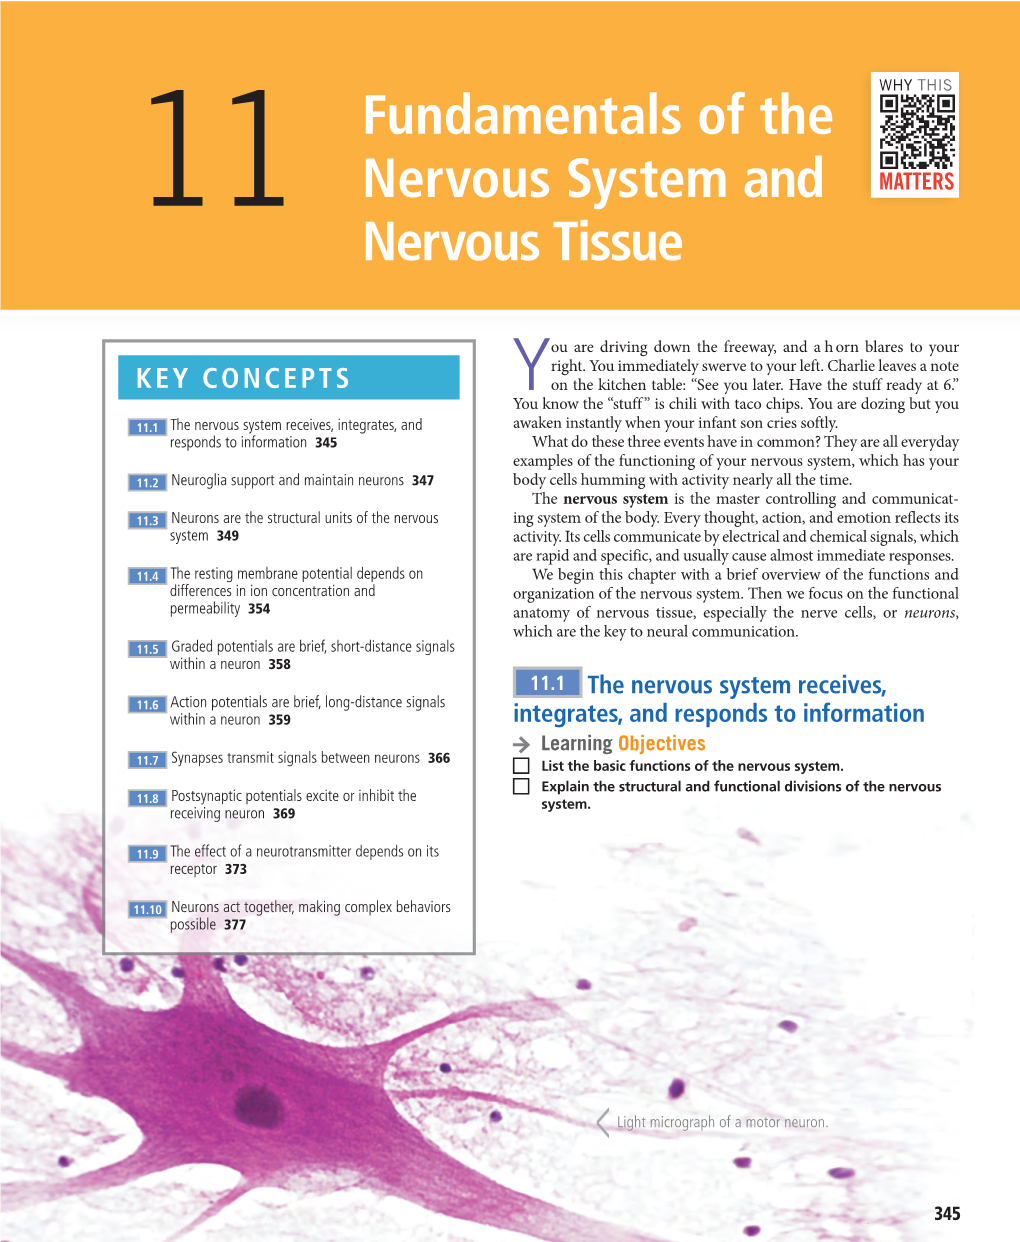 Fundamentals of the Nervous System and Nervous Tissue 347